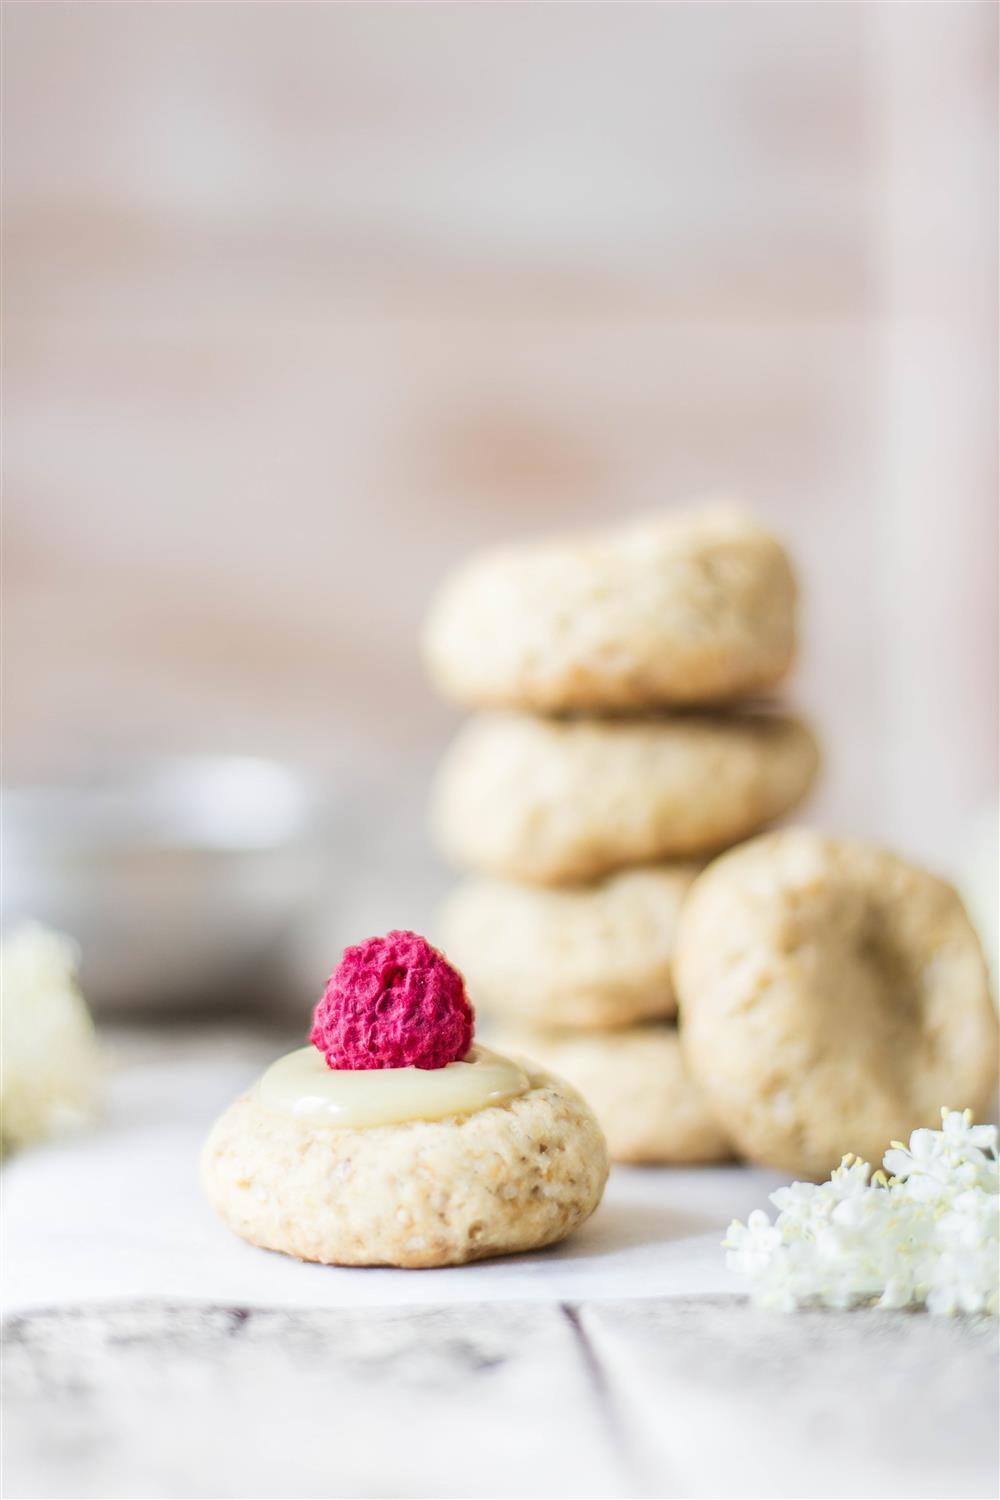 These cute elderflower cookie bites are what elderflower season is all about. Flowers and girliness!